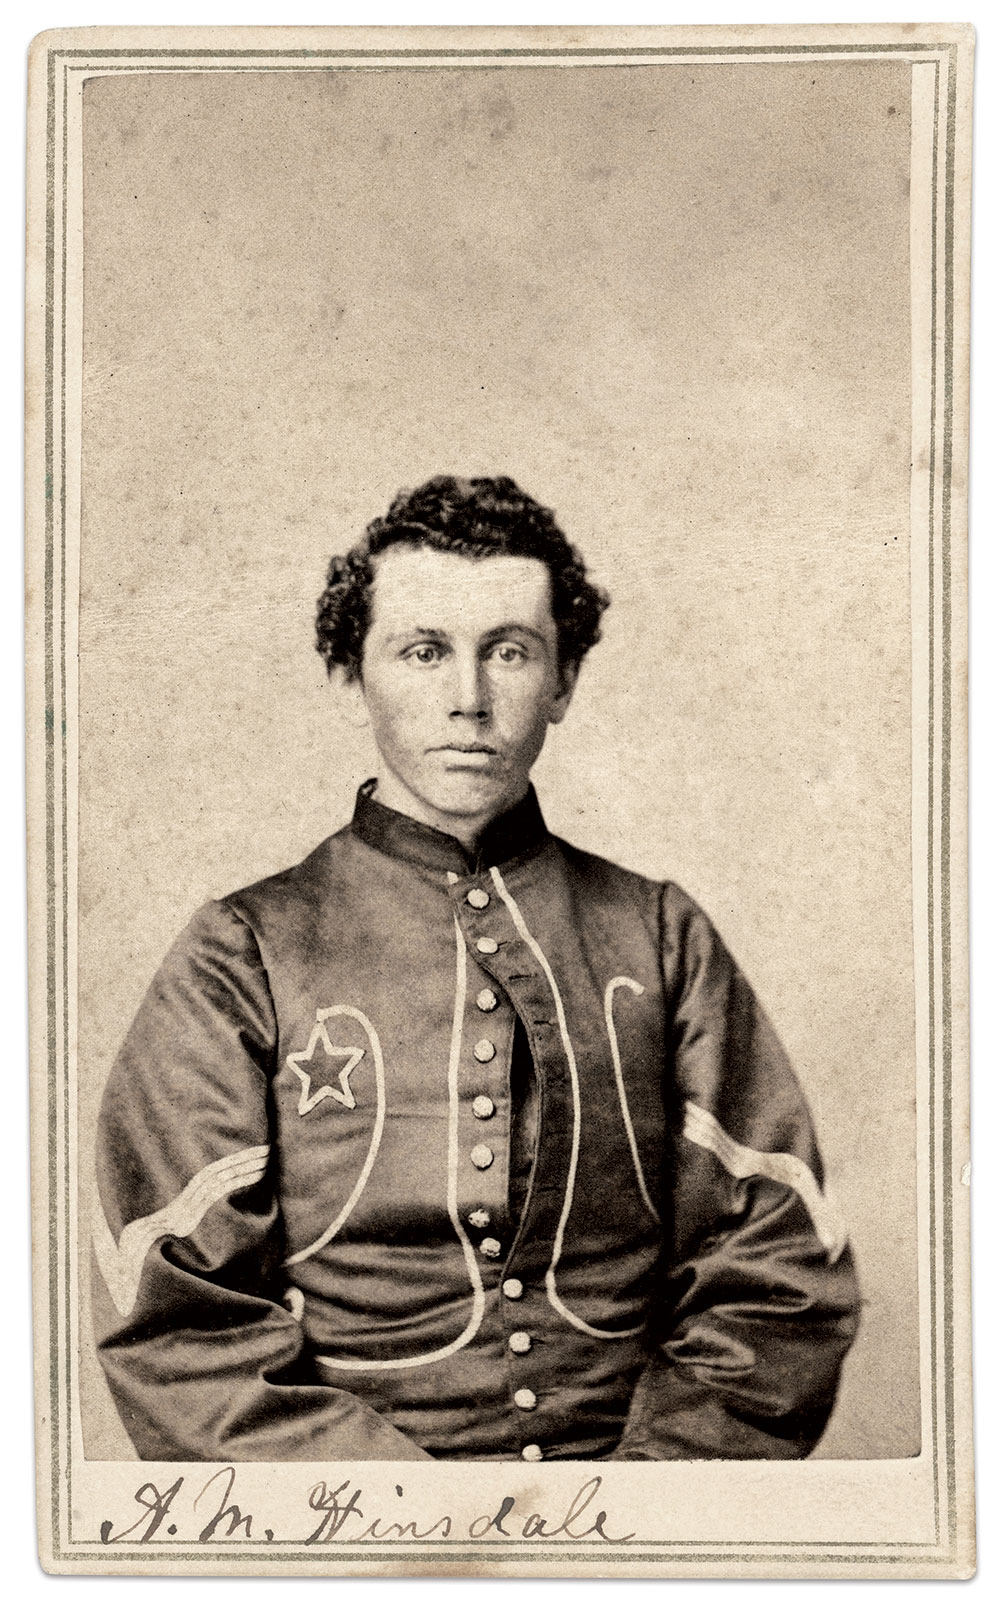 The shield is missing from the jacket of Sgt. Augustus M. Hinsdale (1844-1902) of Company K. Carte de visite by Theodore Lilienthal of New Orleans, La. Mark Warren Collection.